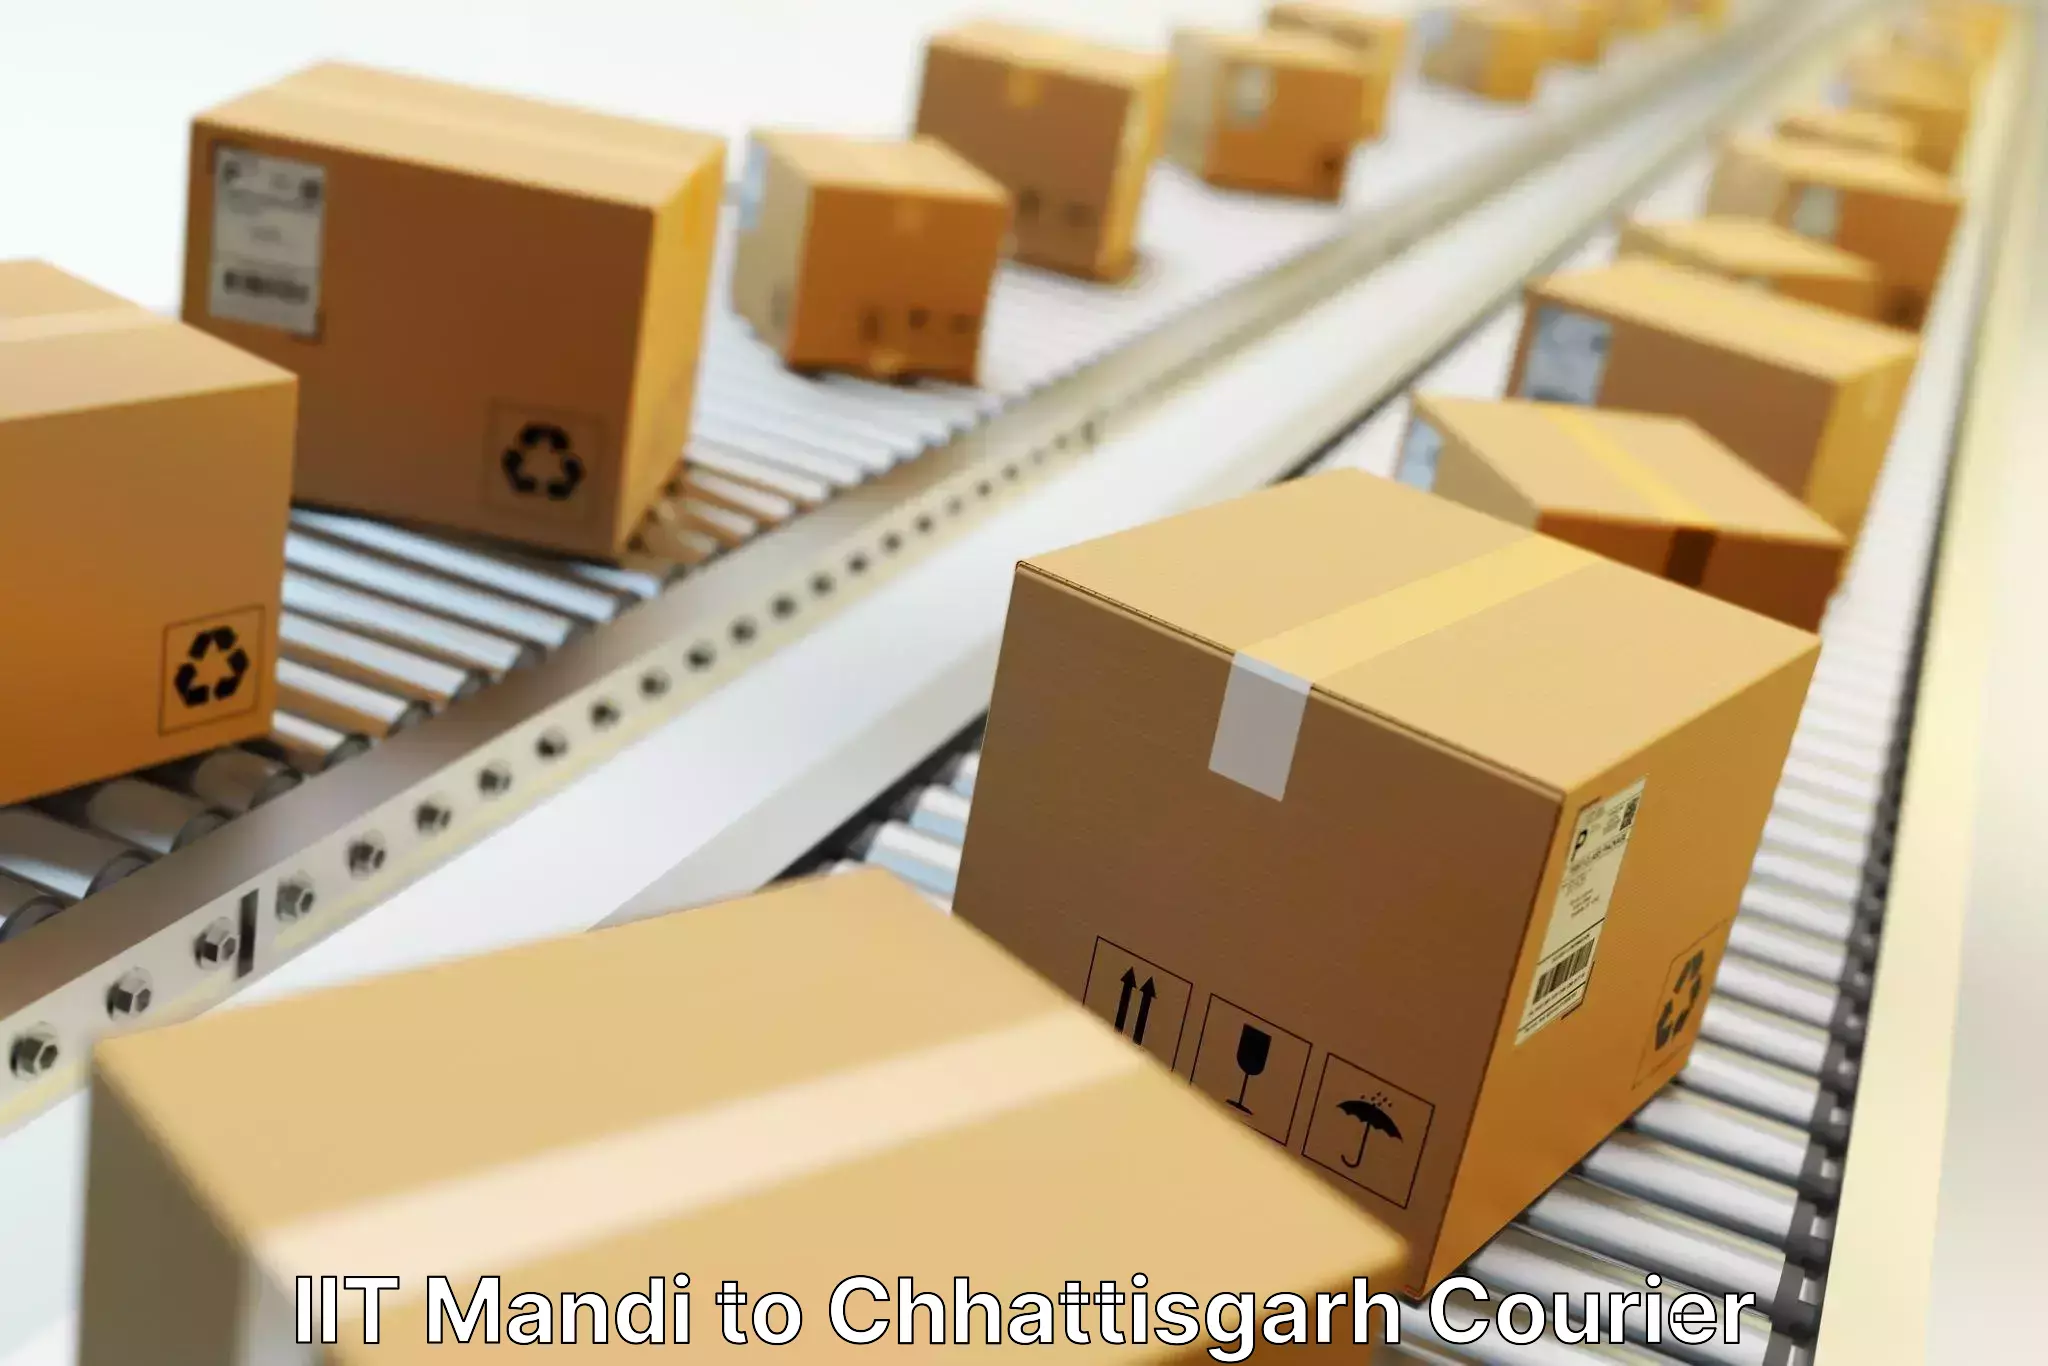 State-of-the-art courier technology IIT Mandi to Abhanpur